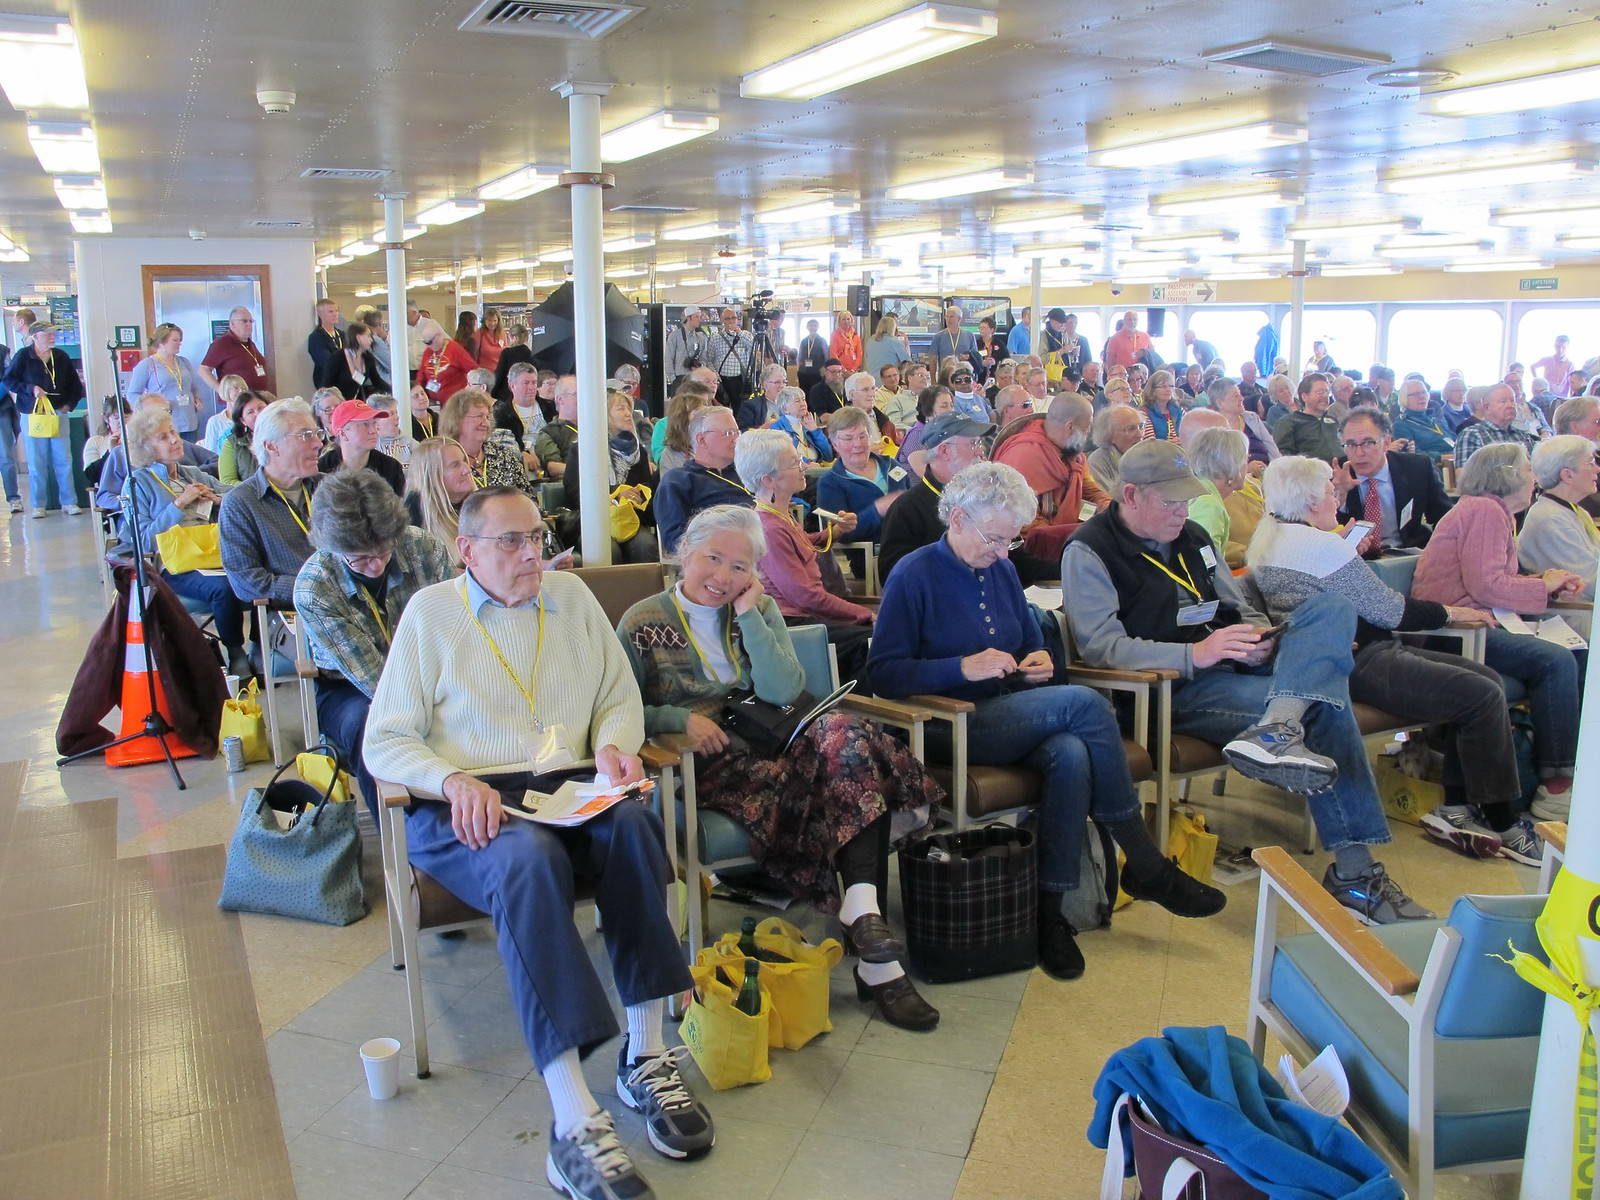 More than a hundred people gather in close proximity for the annual meeting aboard Washington State Ferries each spring as is evidenced by this file photo from 2016. (file photo)